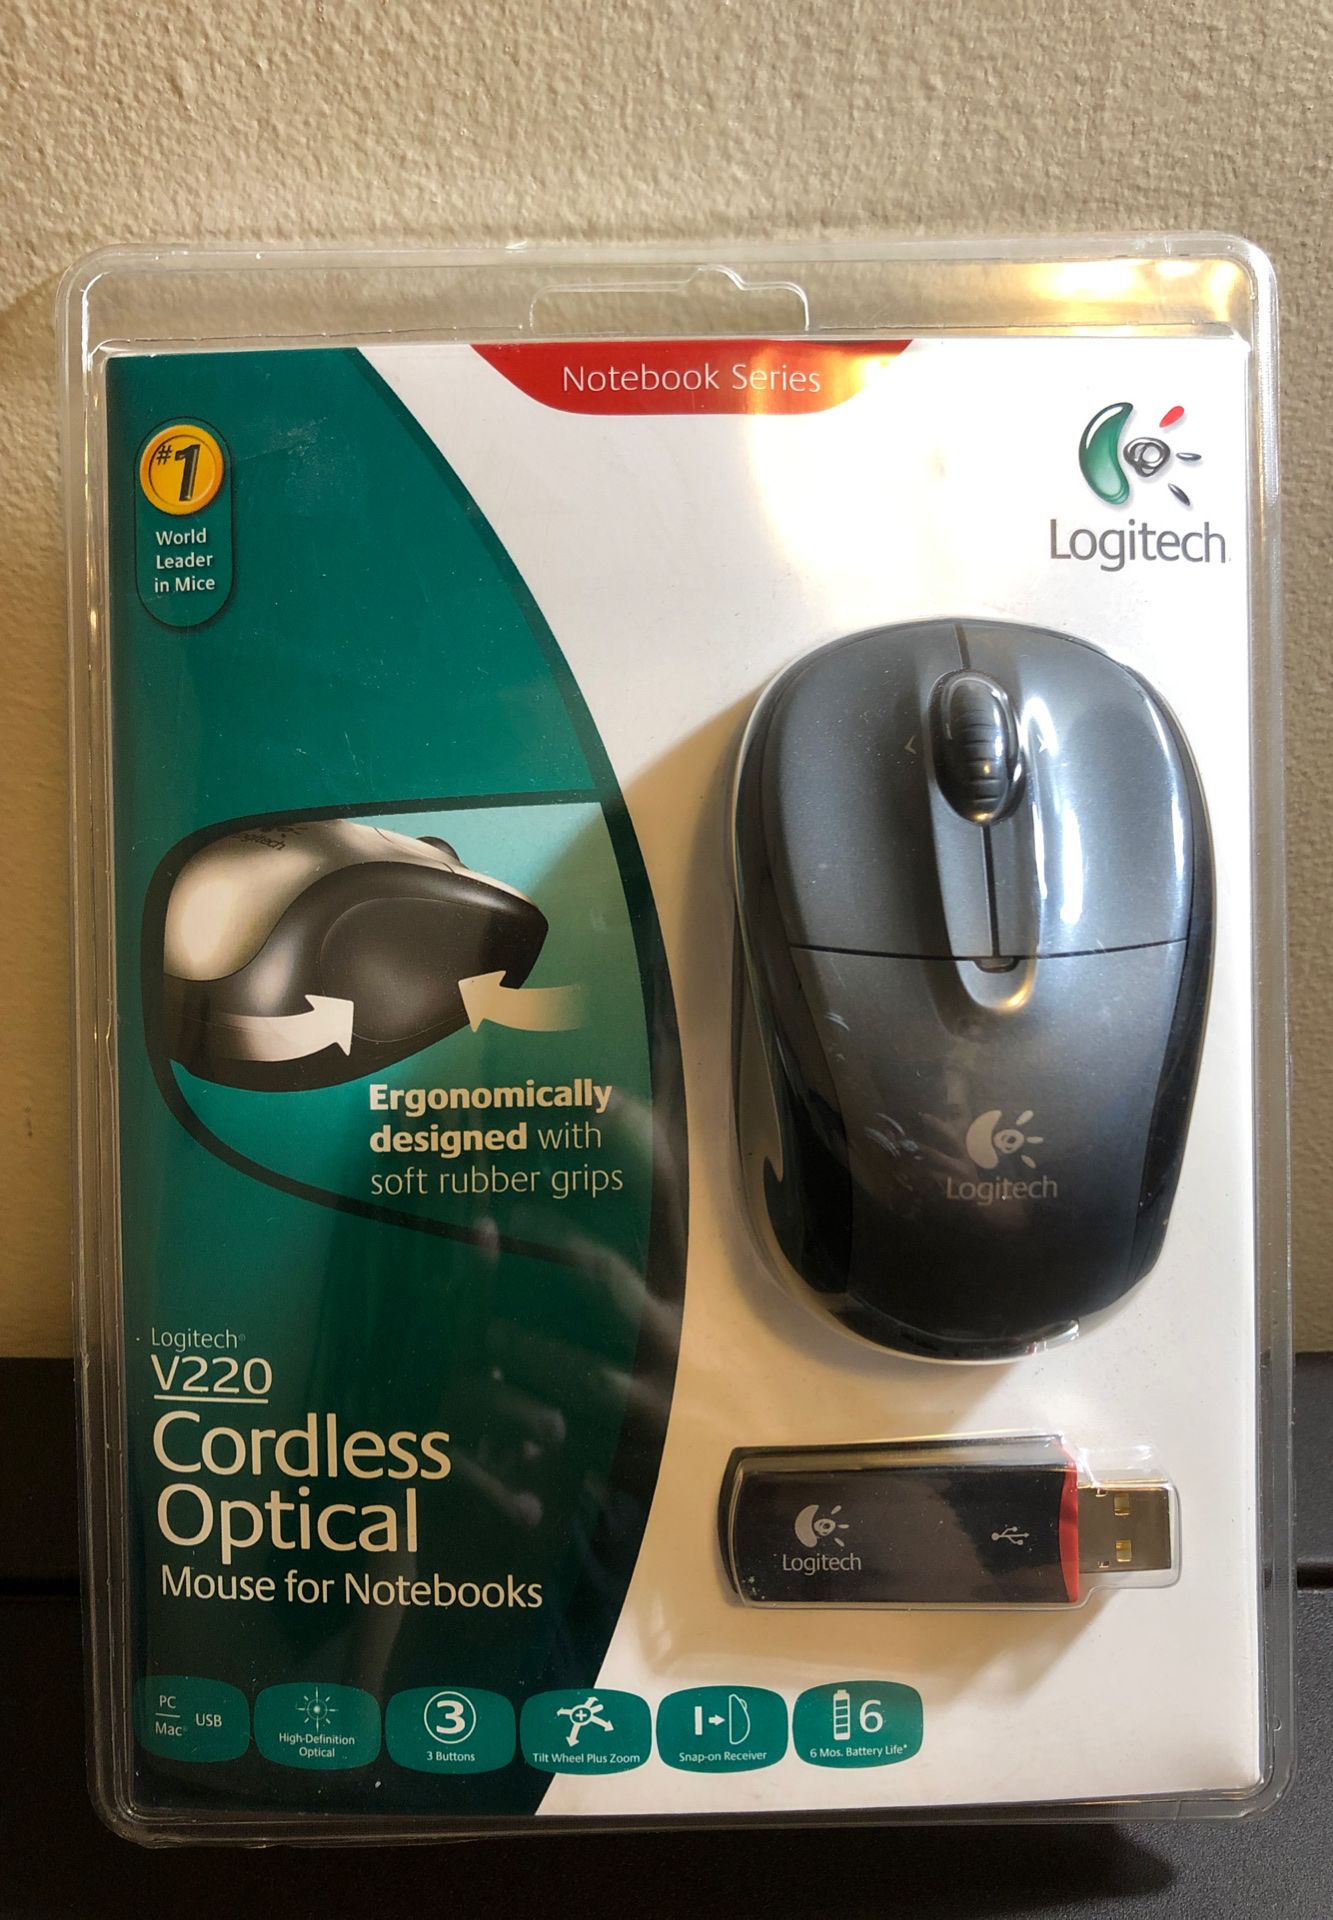 Logitech Wireless Mouse, V220 cordless optical mouse for notebooks, pc, Mac